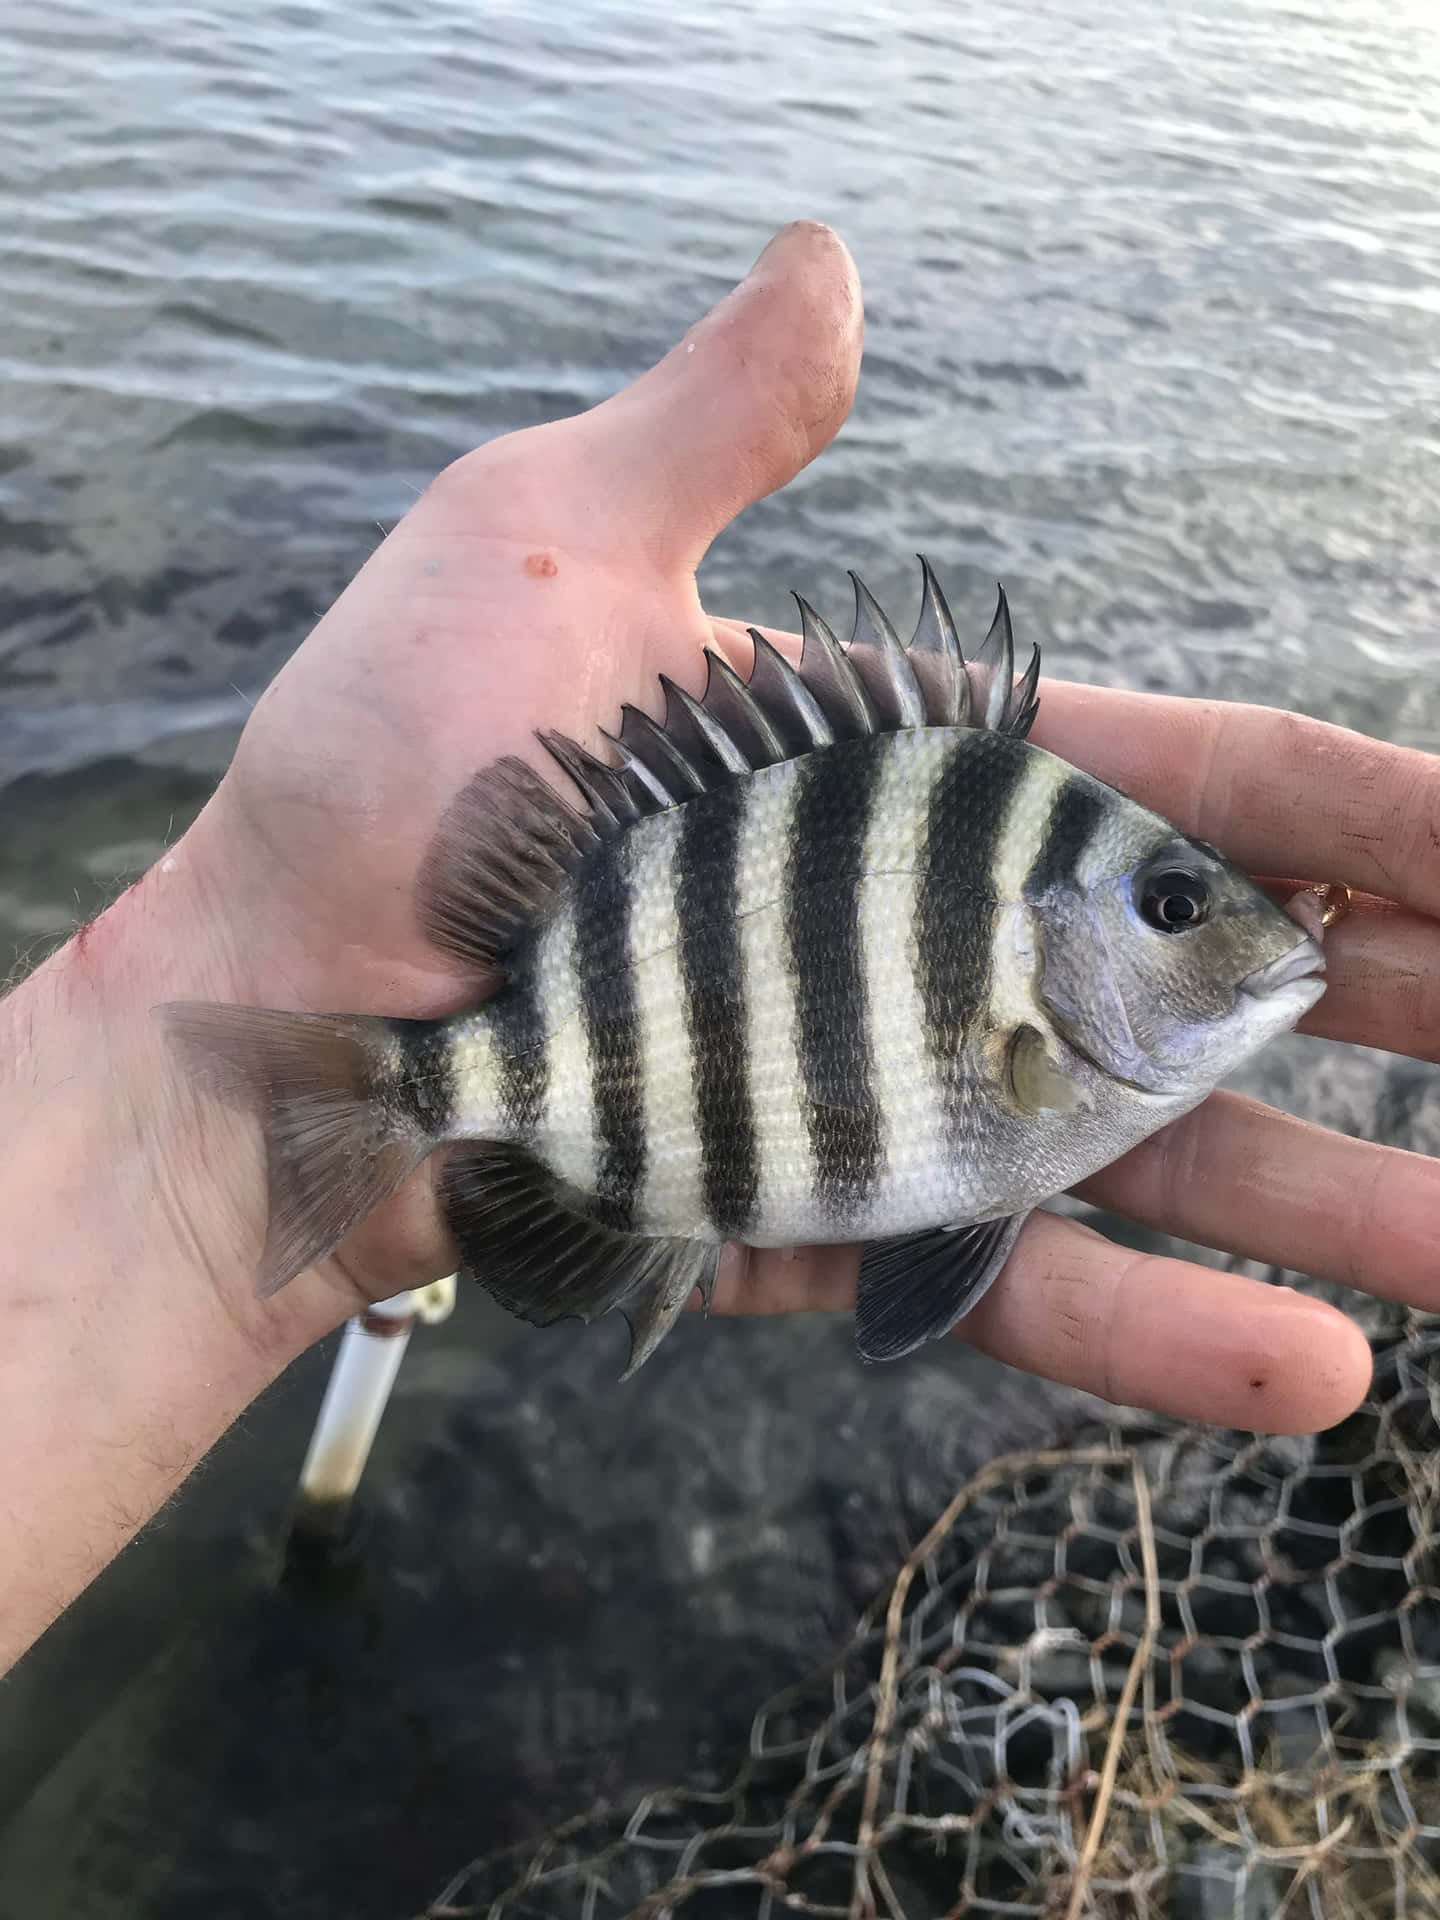 A Person Holding A Fish With Striped Fins